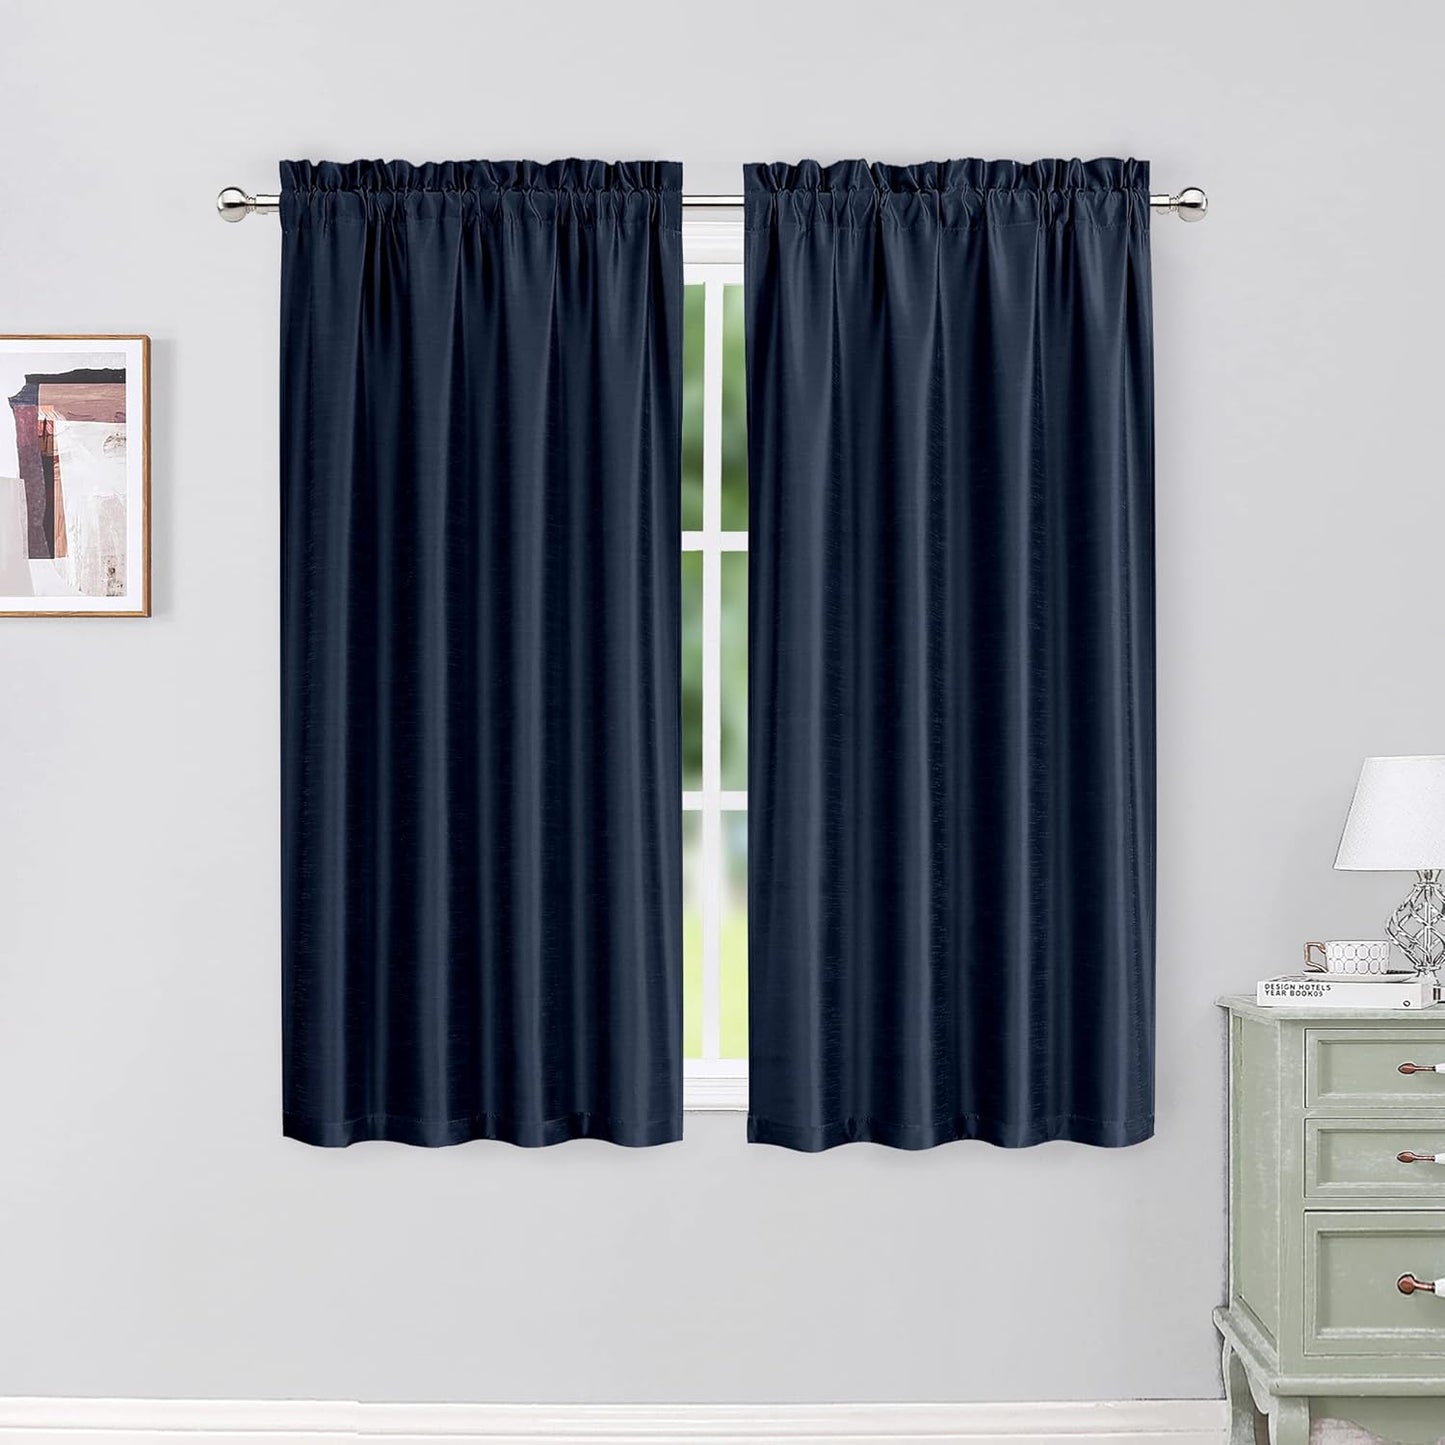 Chyhomenyc Uptown Sage Green Kitchen Curtains 45 Inch Length 2 Panels, Room Darkening Faux Silk Chic Fabric Short Window Curtains for Bedroom Living Room, Each 30Wx45L  Chyhomenyc Navy Blue 2X30"Wx54"L 